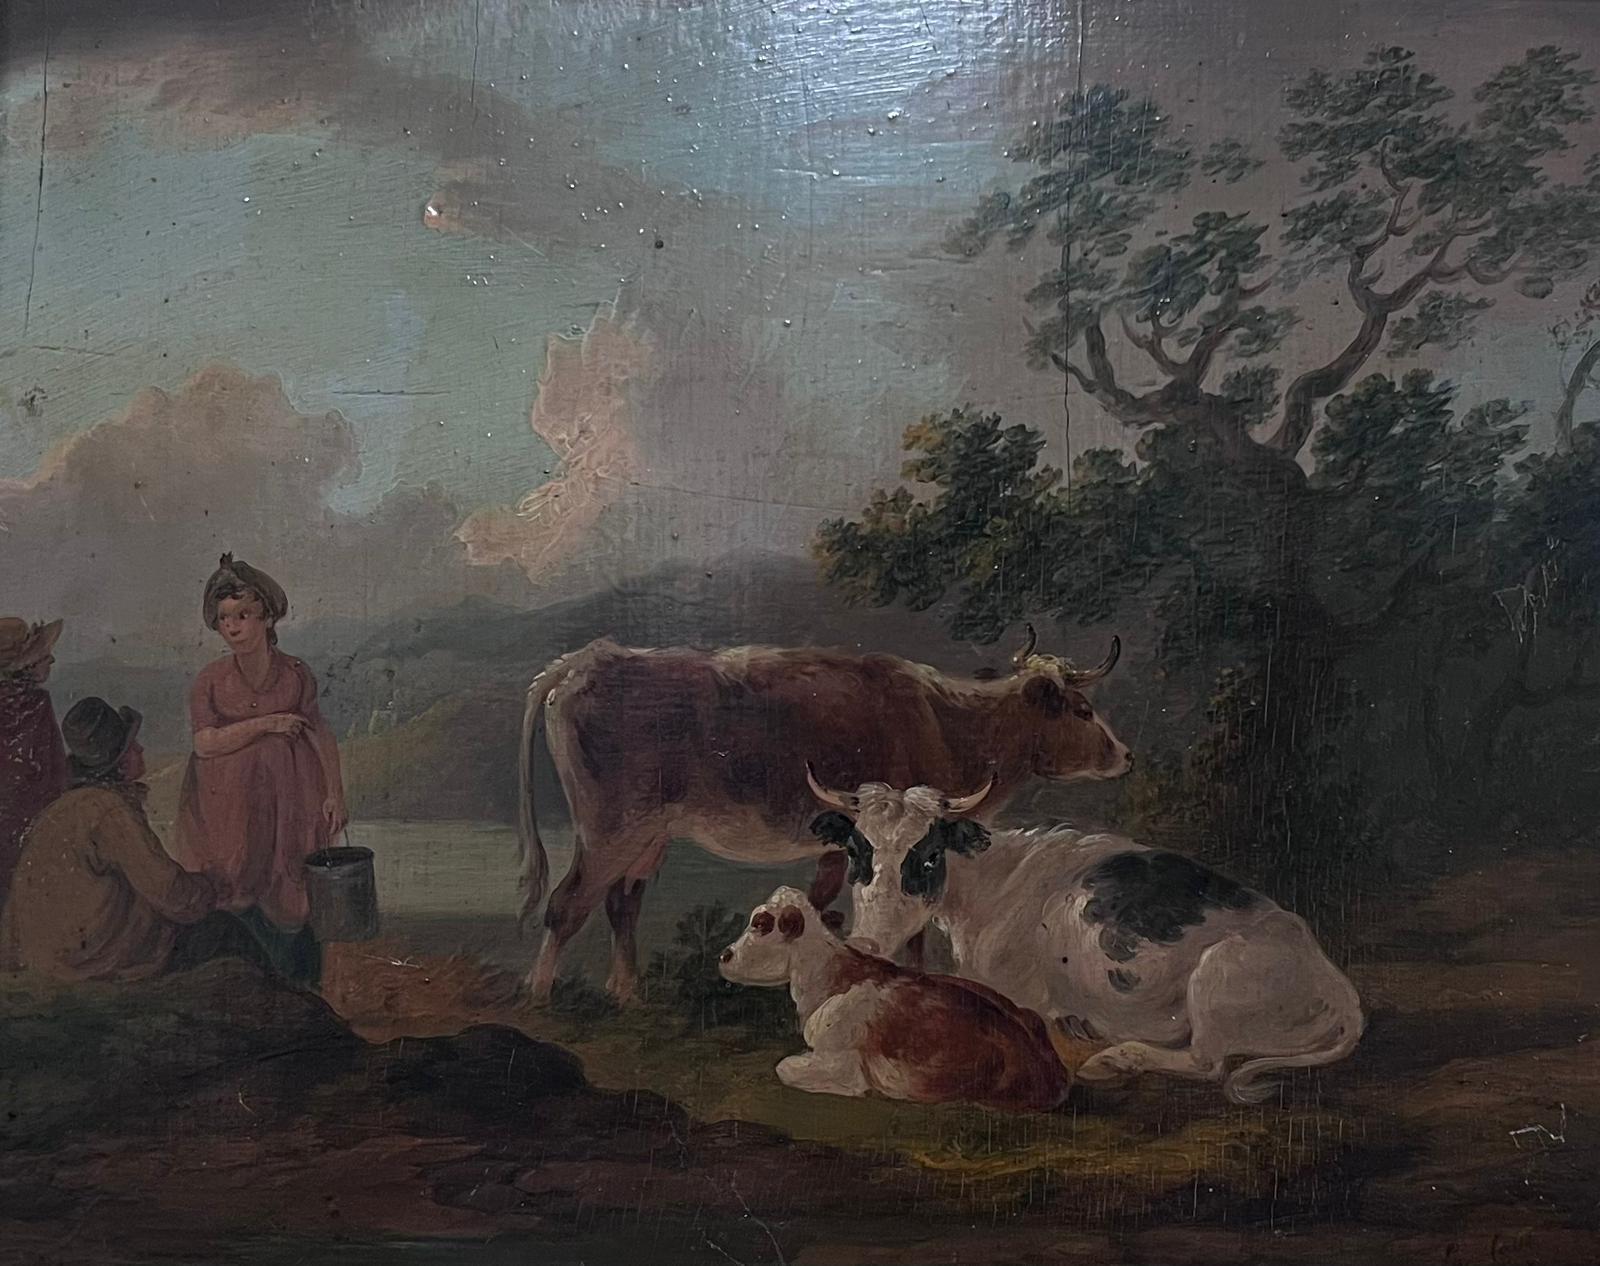 c. 1800 Shepherd & Milk Maid with Cattle Pastoral Landscape Oil on Wood Panel - Painting by Peter la Cave (fl. 1789-1816)